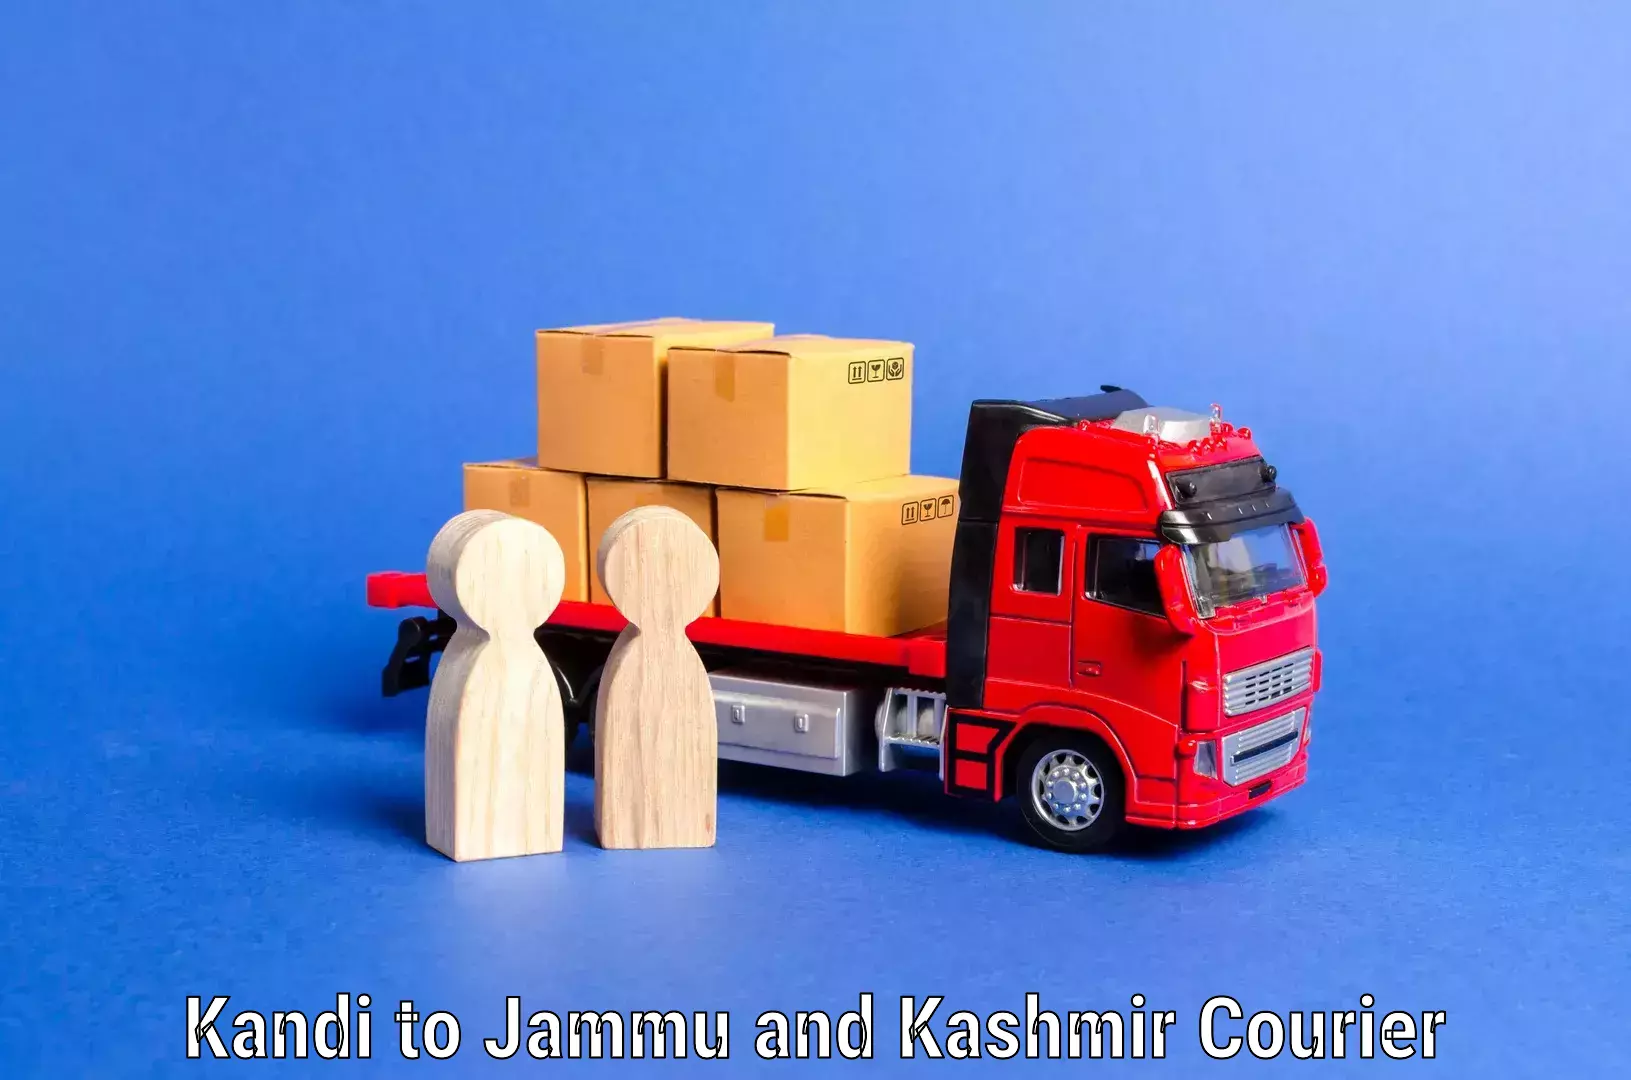 Affordable relocation services in Kandi to Jammu and Kashmir